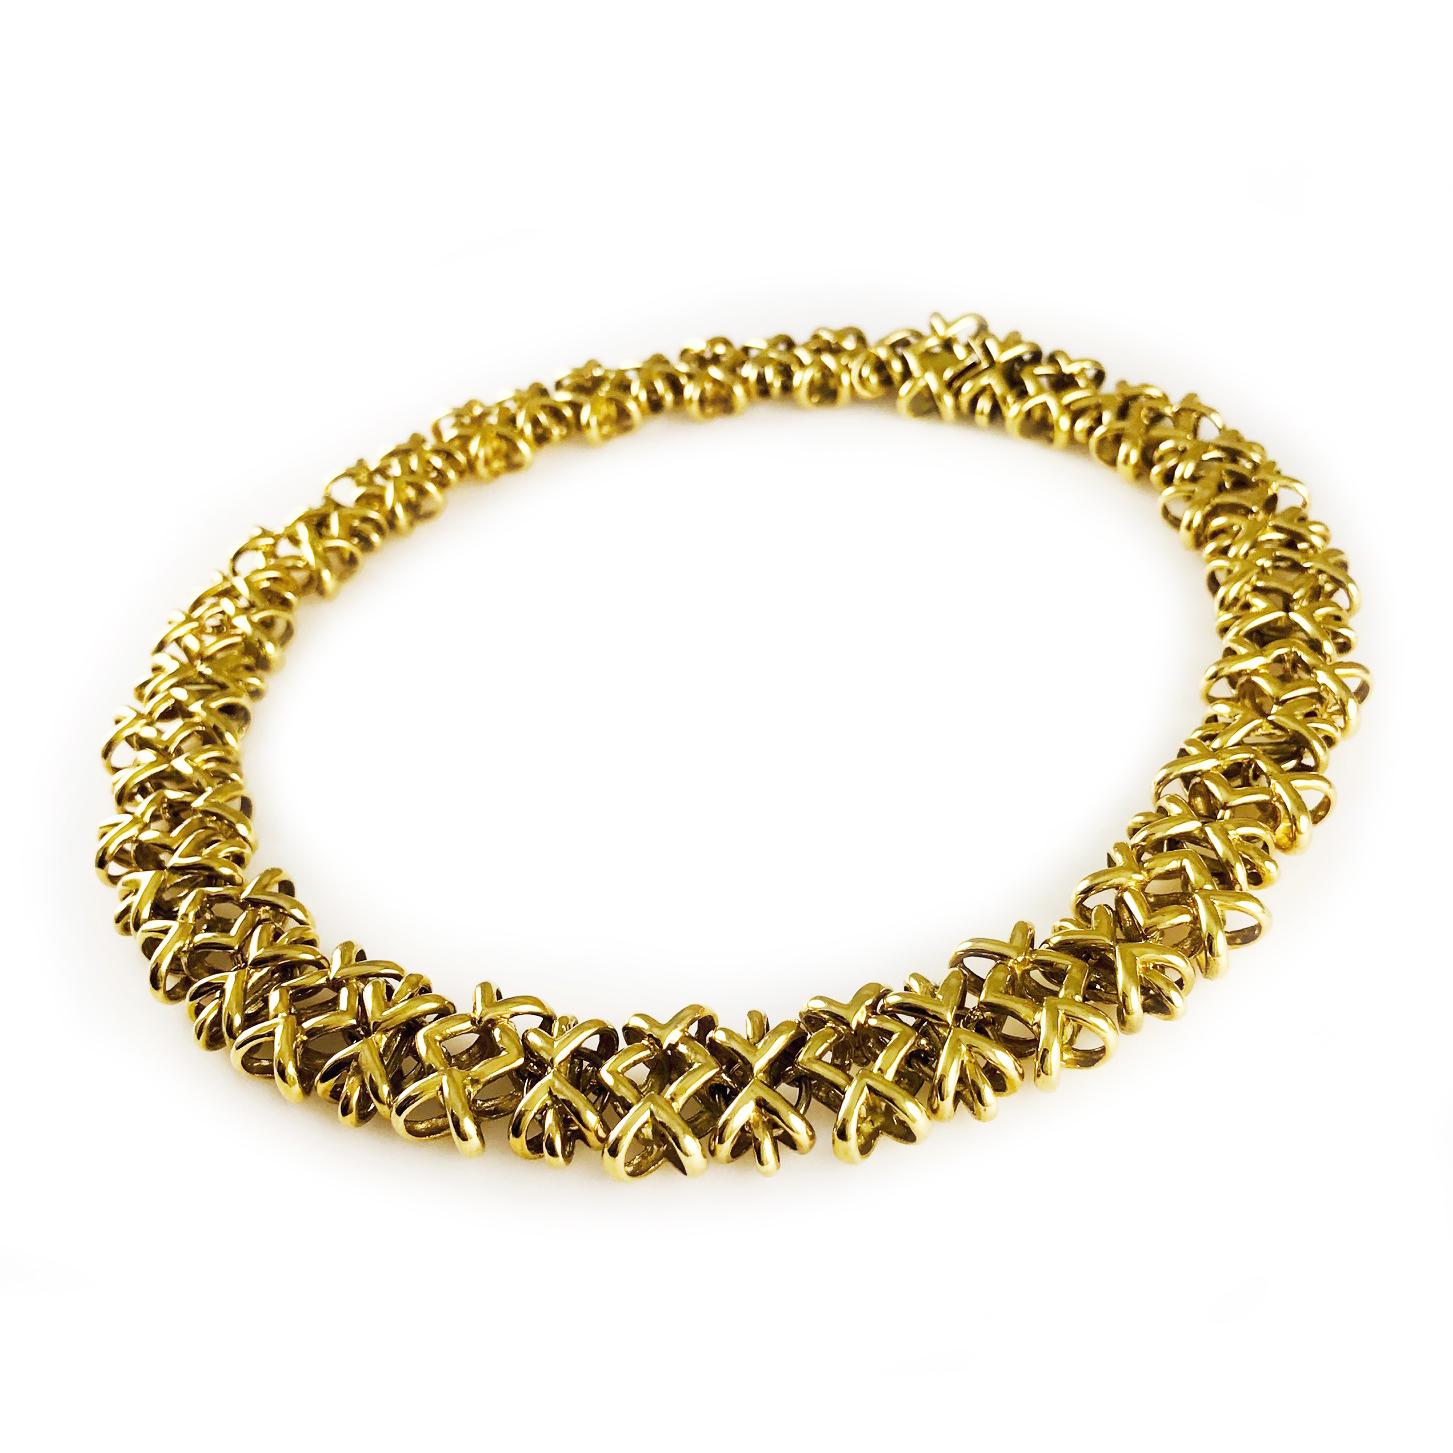 18 Karat Yellow Gold Crisscross Link Necklace. This stunning heavyweight  17mm wide necklace is a true statement piece, the design is reminiscent of a Tiffany & Co. 